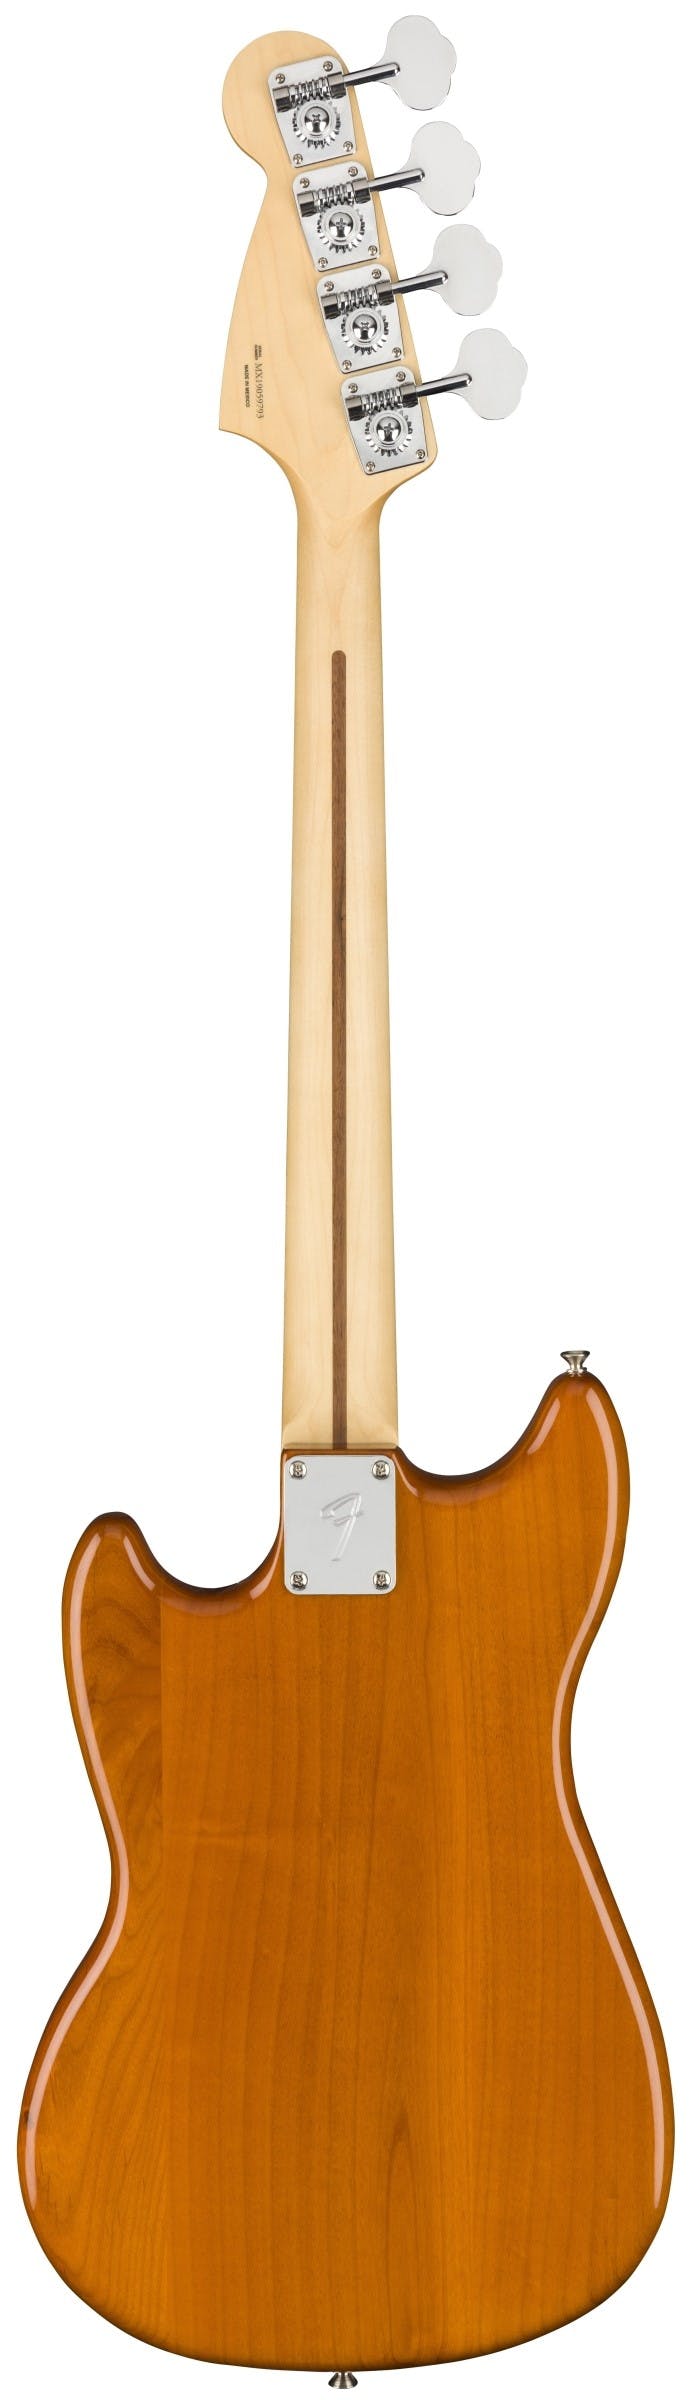 Fender Player Mustang Bass PJ in Aged Natural - Andertons Music Co.